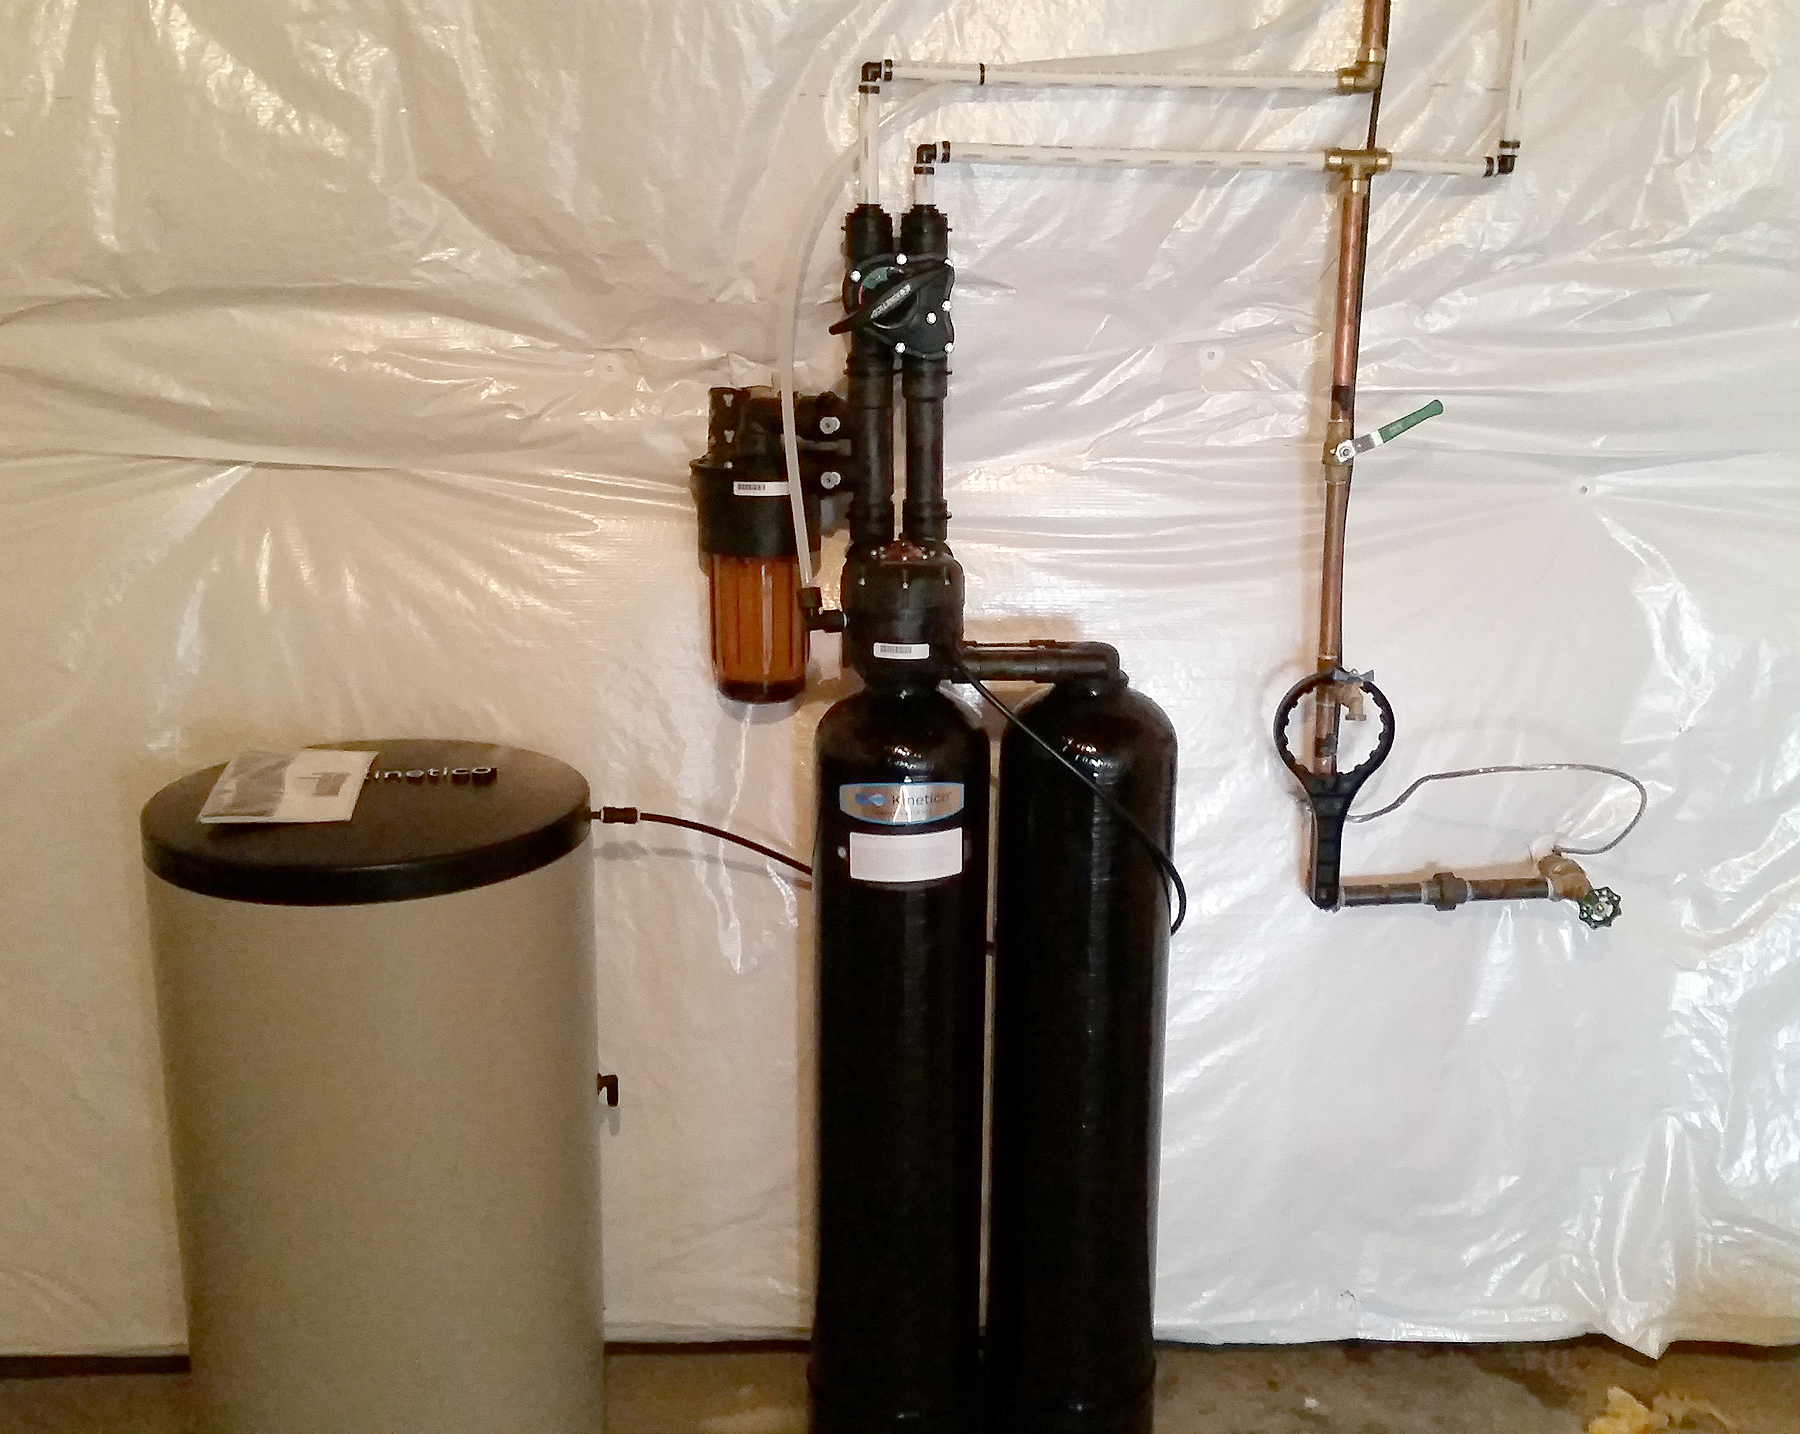 Kinetico’s entire home water treatment system installed in Port Byron, Illinois